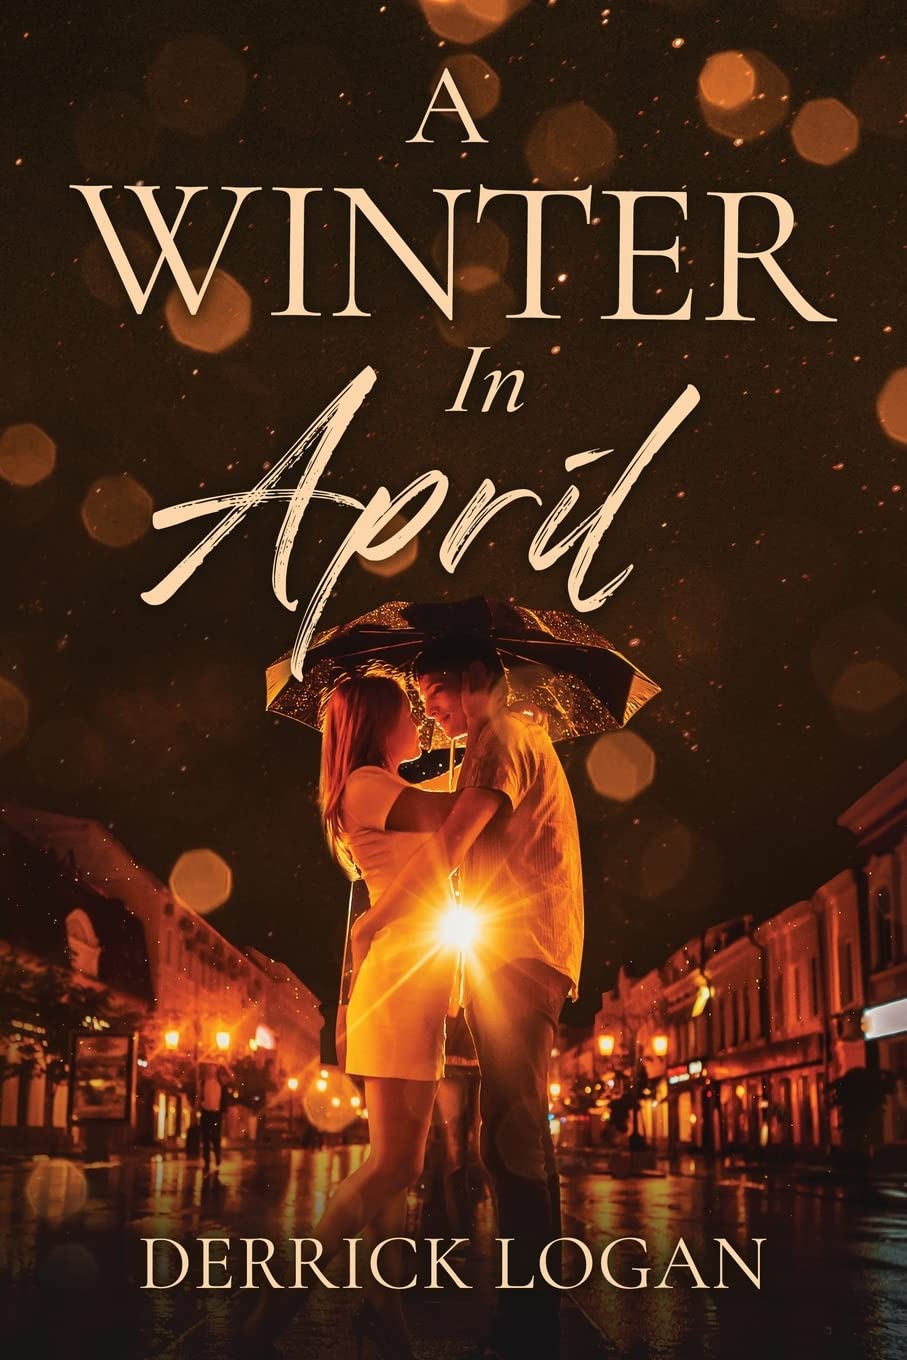 New novel "A Winter in April" by Derrick Logan is released, an adventurous romance of heartbreak, happiness, and chance encounters that alter the course of destiny